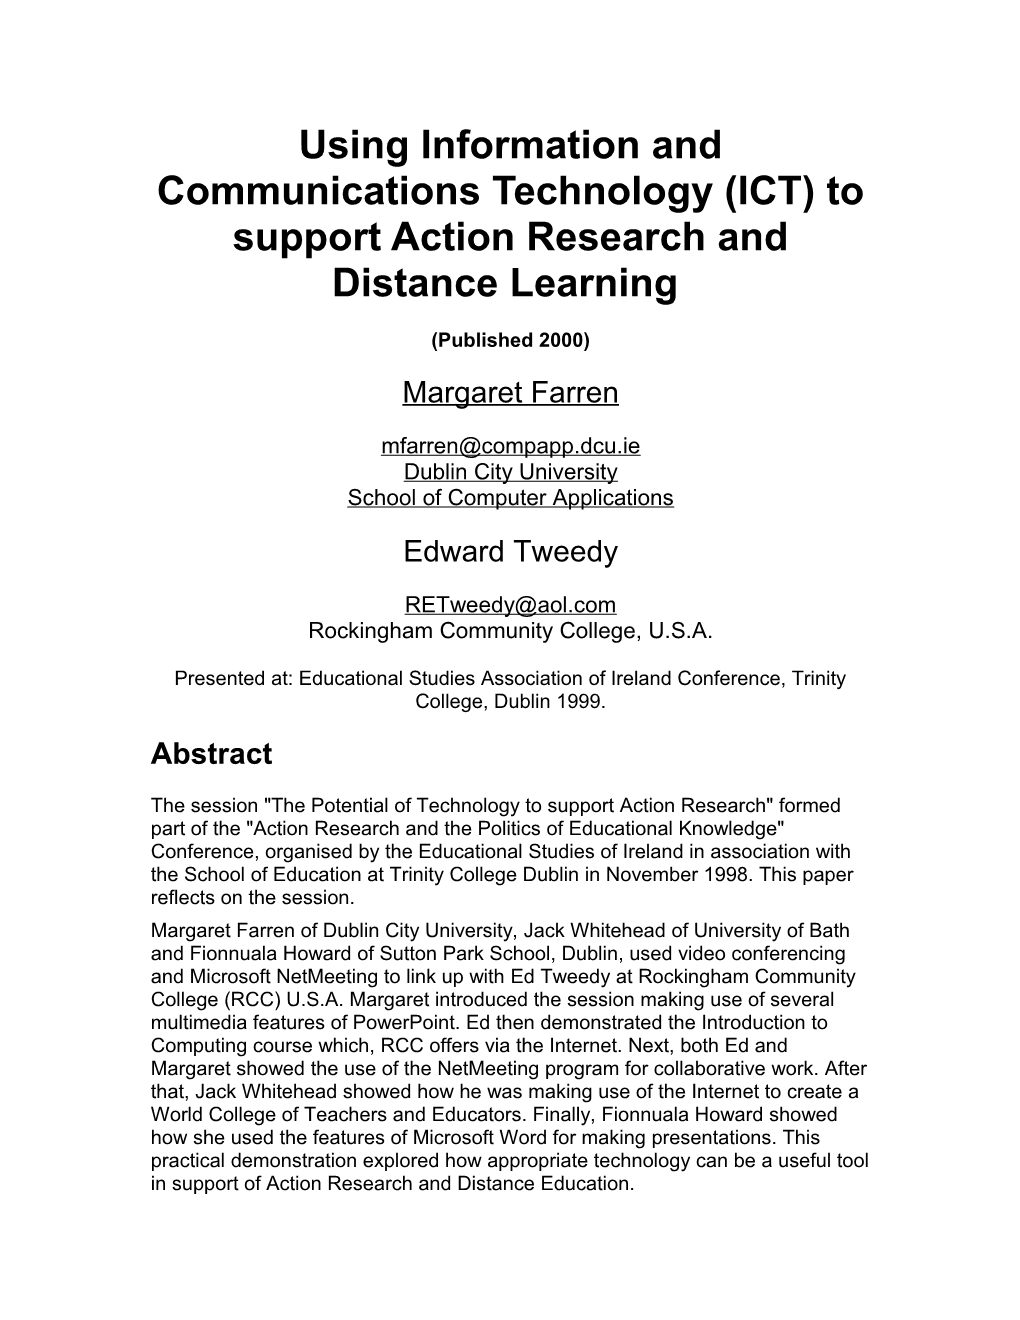 Using Information and Communications Technology (ICT) to Support Action Research and Distance